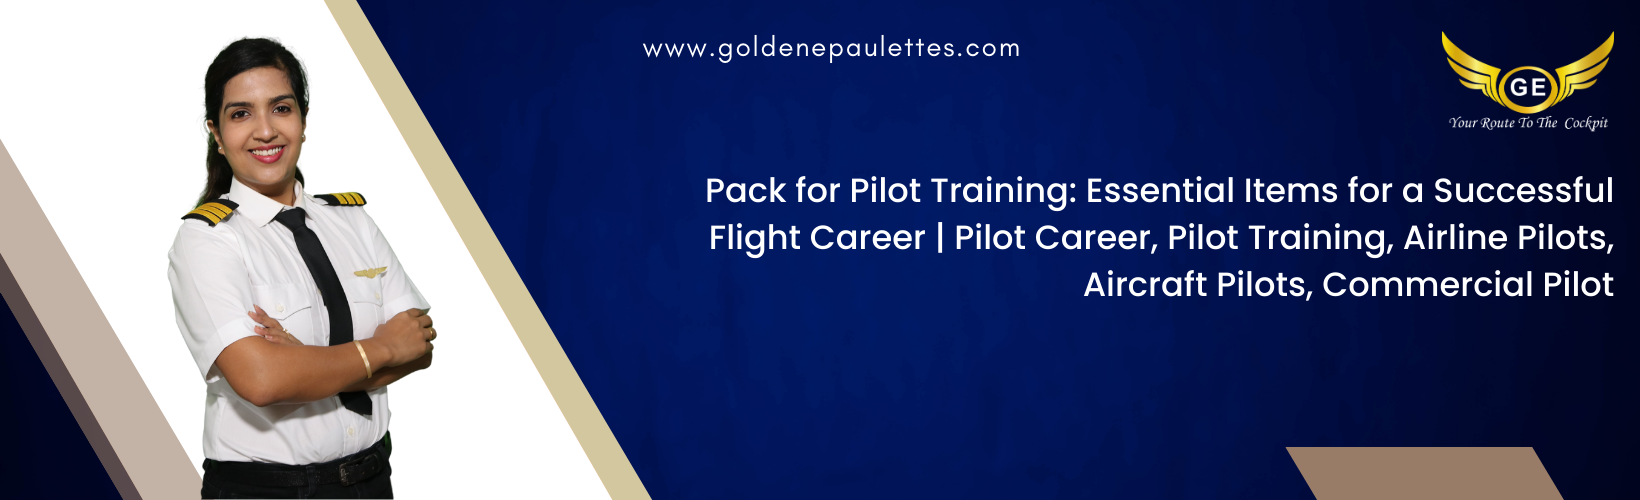 What to Pack for Pilot Training